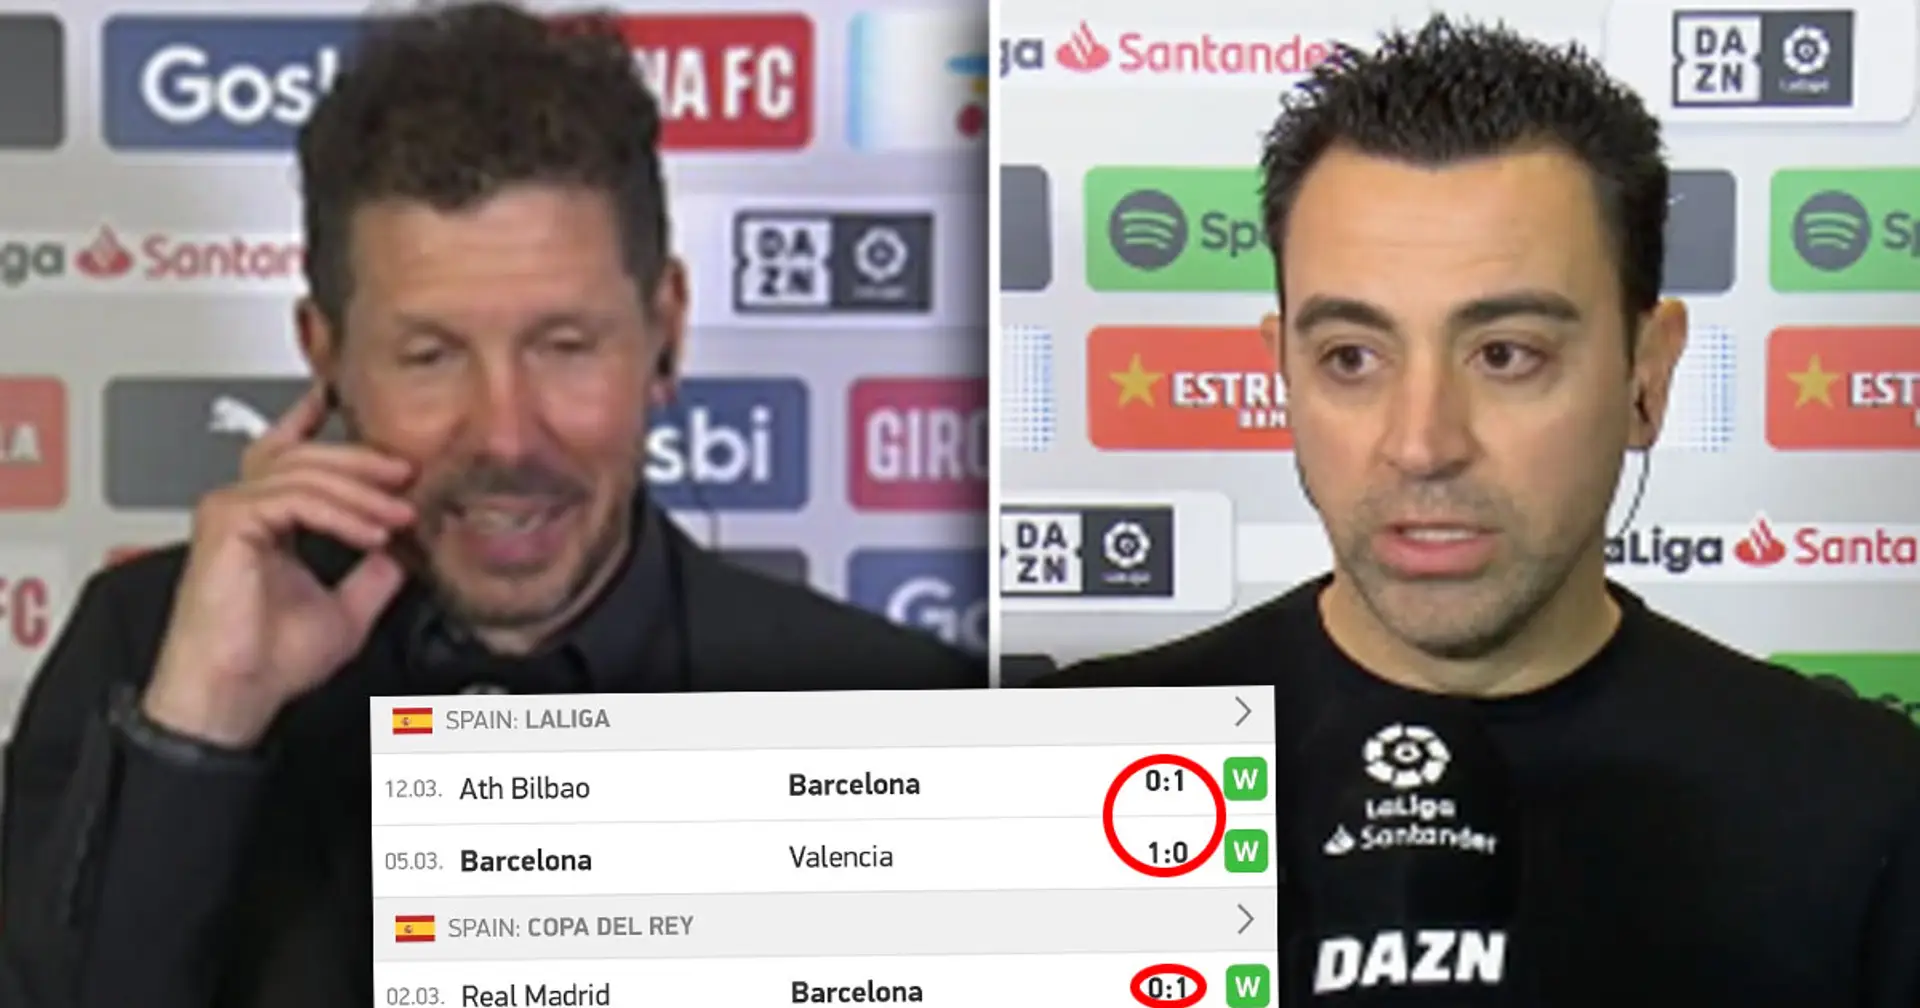 Simeone apparently sends message to Xavi after Barca win 1-0 in 3 straight games